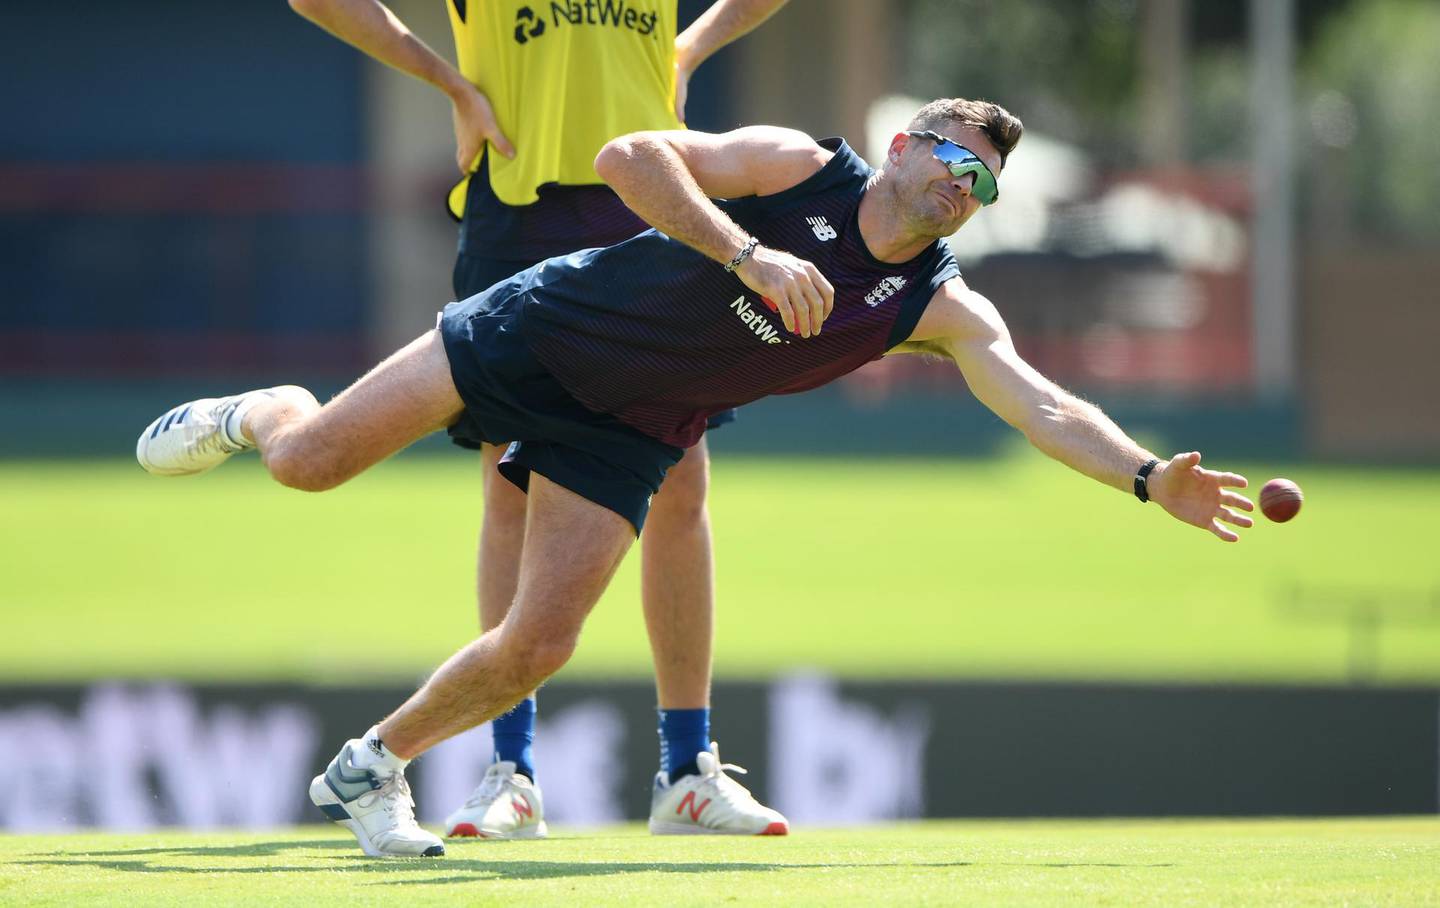 CENTURION, SOUTH AFRICA - DECEMBER 24: England bowler James Anderson in catching action, ahead of potentially, his 150th Test Match  during an England nets session ahead of the First Test Match against South Africa at SuperSport Park on December 24, 2019 in Pretoria, South Africa. (Photo by Stu Forster/Getty Images)